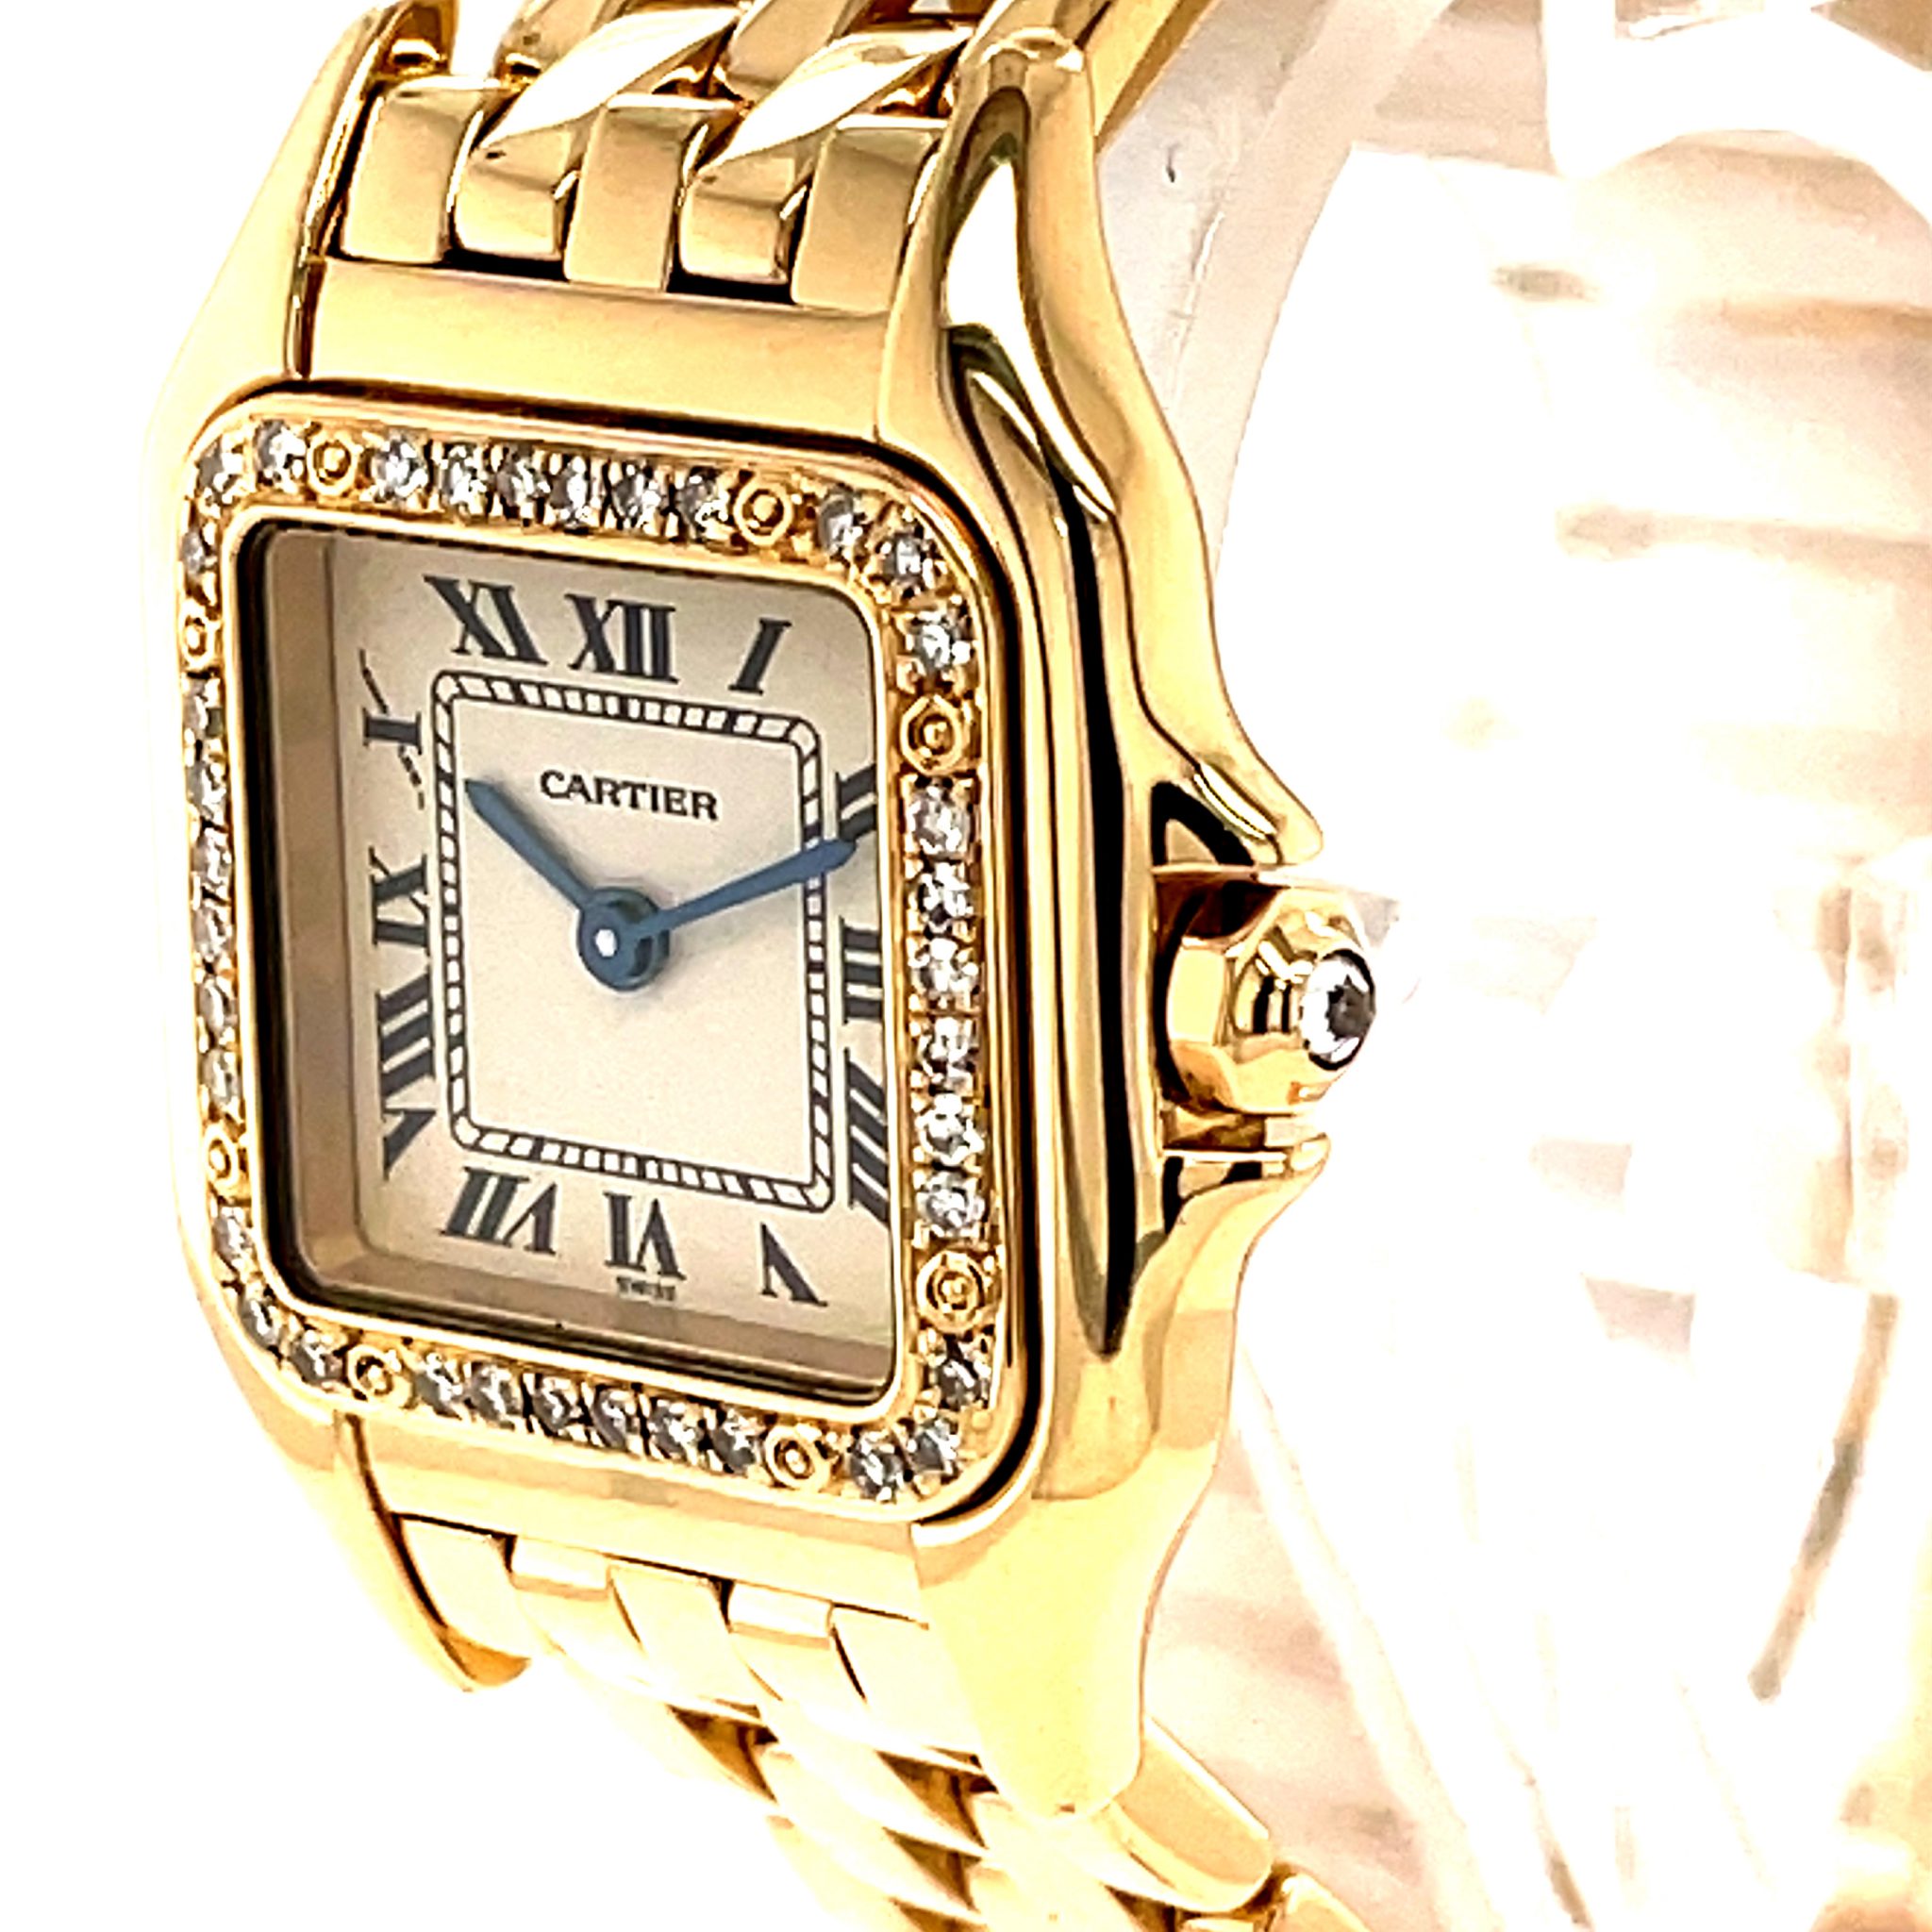 Cartier "Panthere" 22mm Gold 18K Ref. 128000M Factory Setting Diamonds